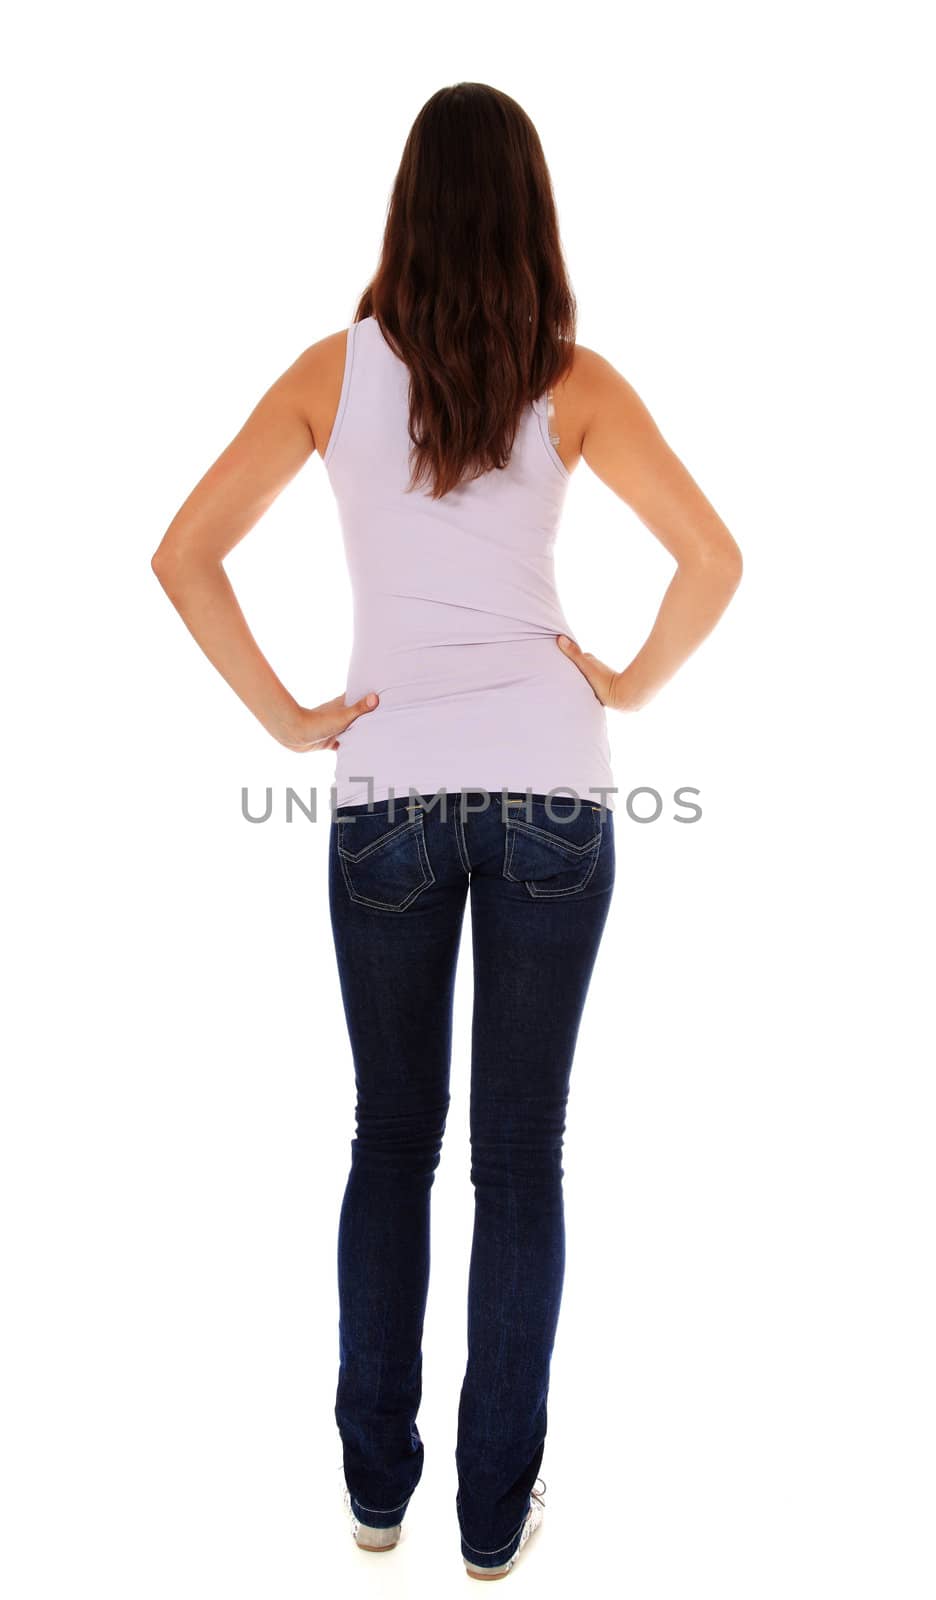 Back view of an attractive young woman. All on white background.